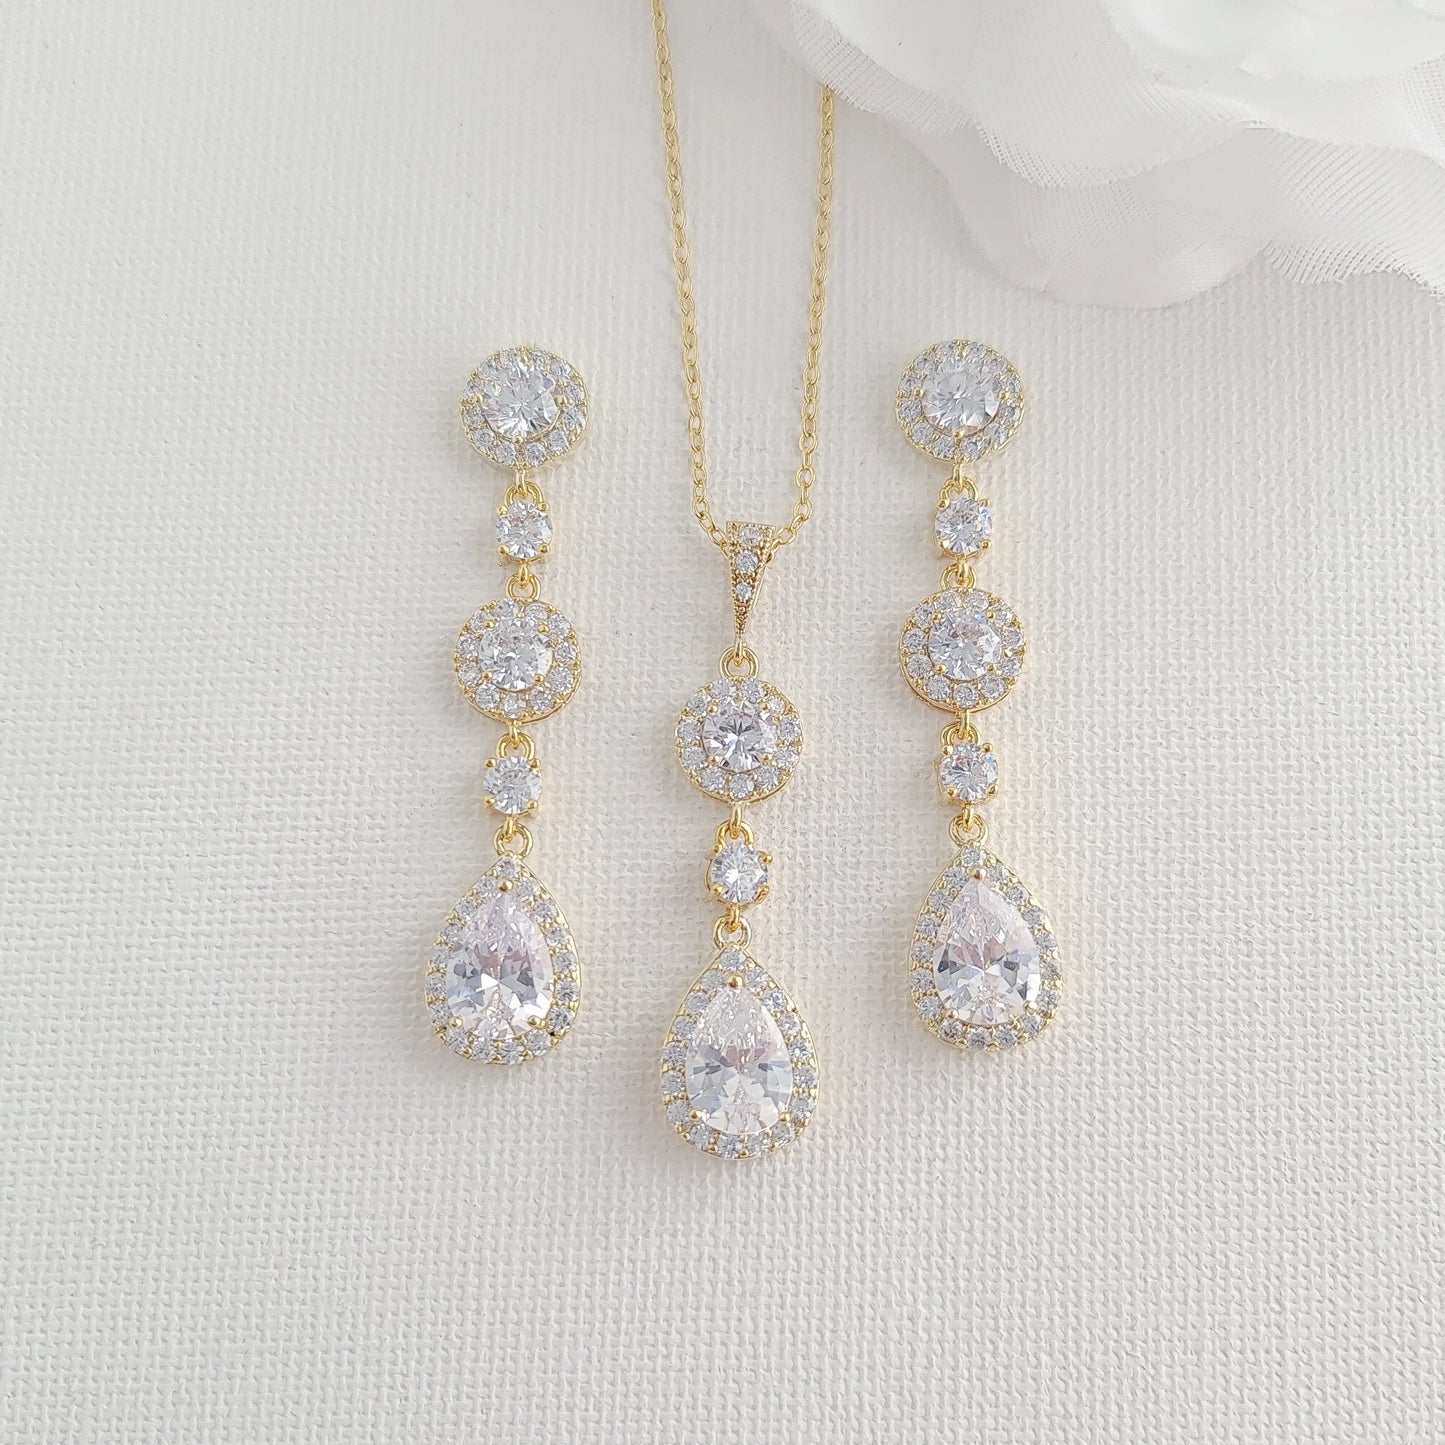 Jewelry Set of Gold Earrings Necklace Bracelet for Your Wedding Day-Reagan